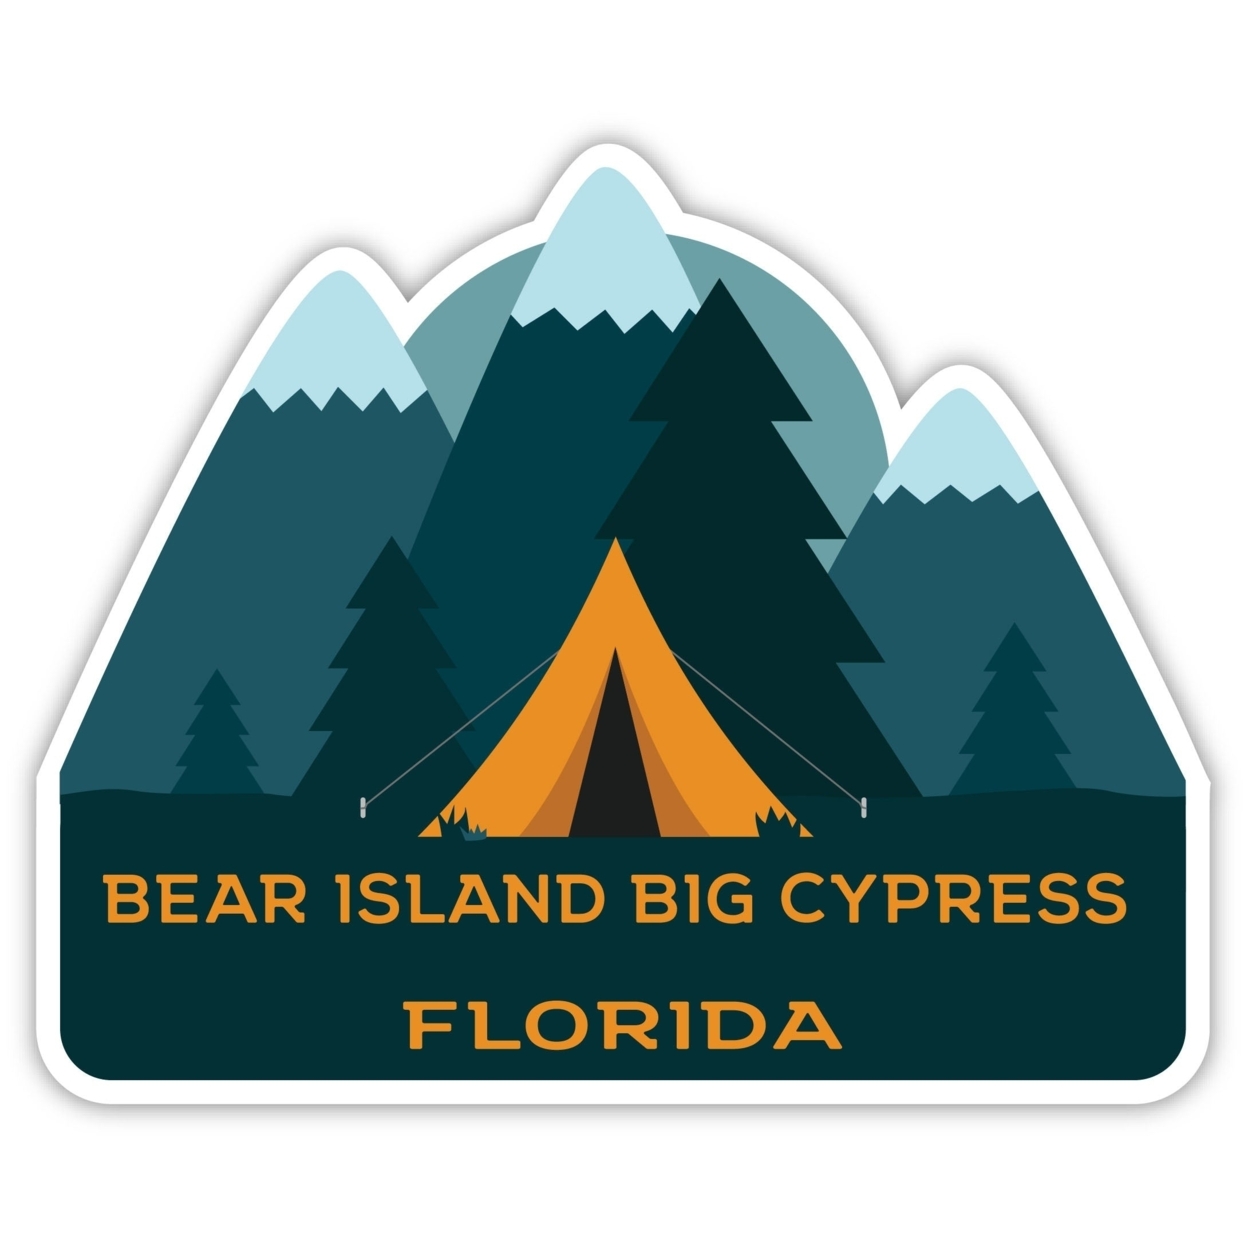 Bear Island Big Cypress Florida Souvenir Decorative Stickers (Choose Theme And Size) - 4-Pack, 12-Inch, Tent